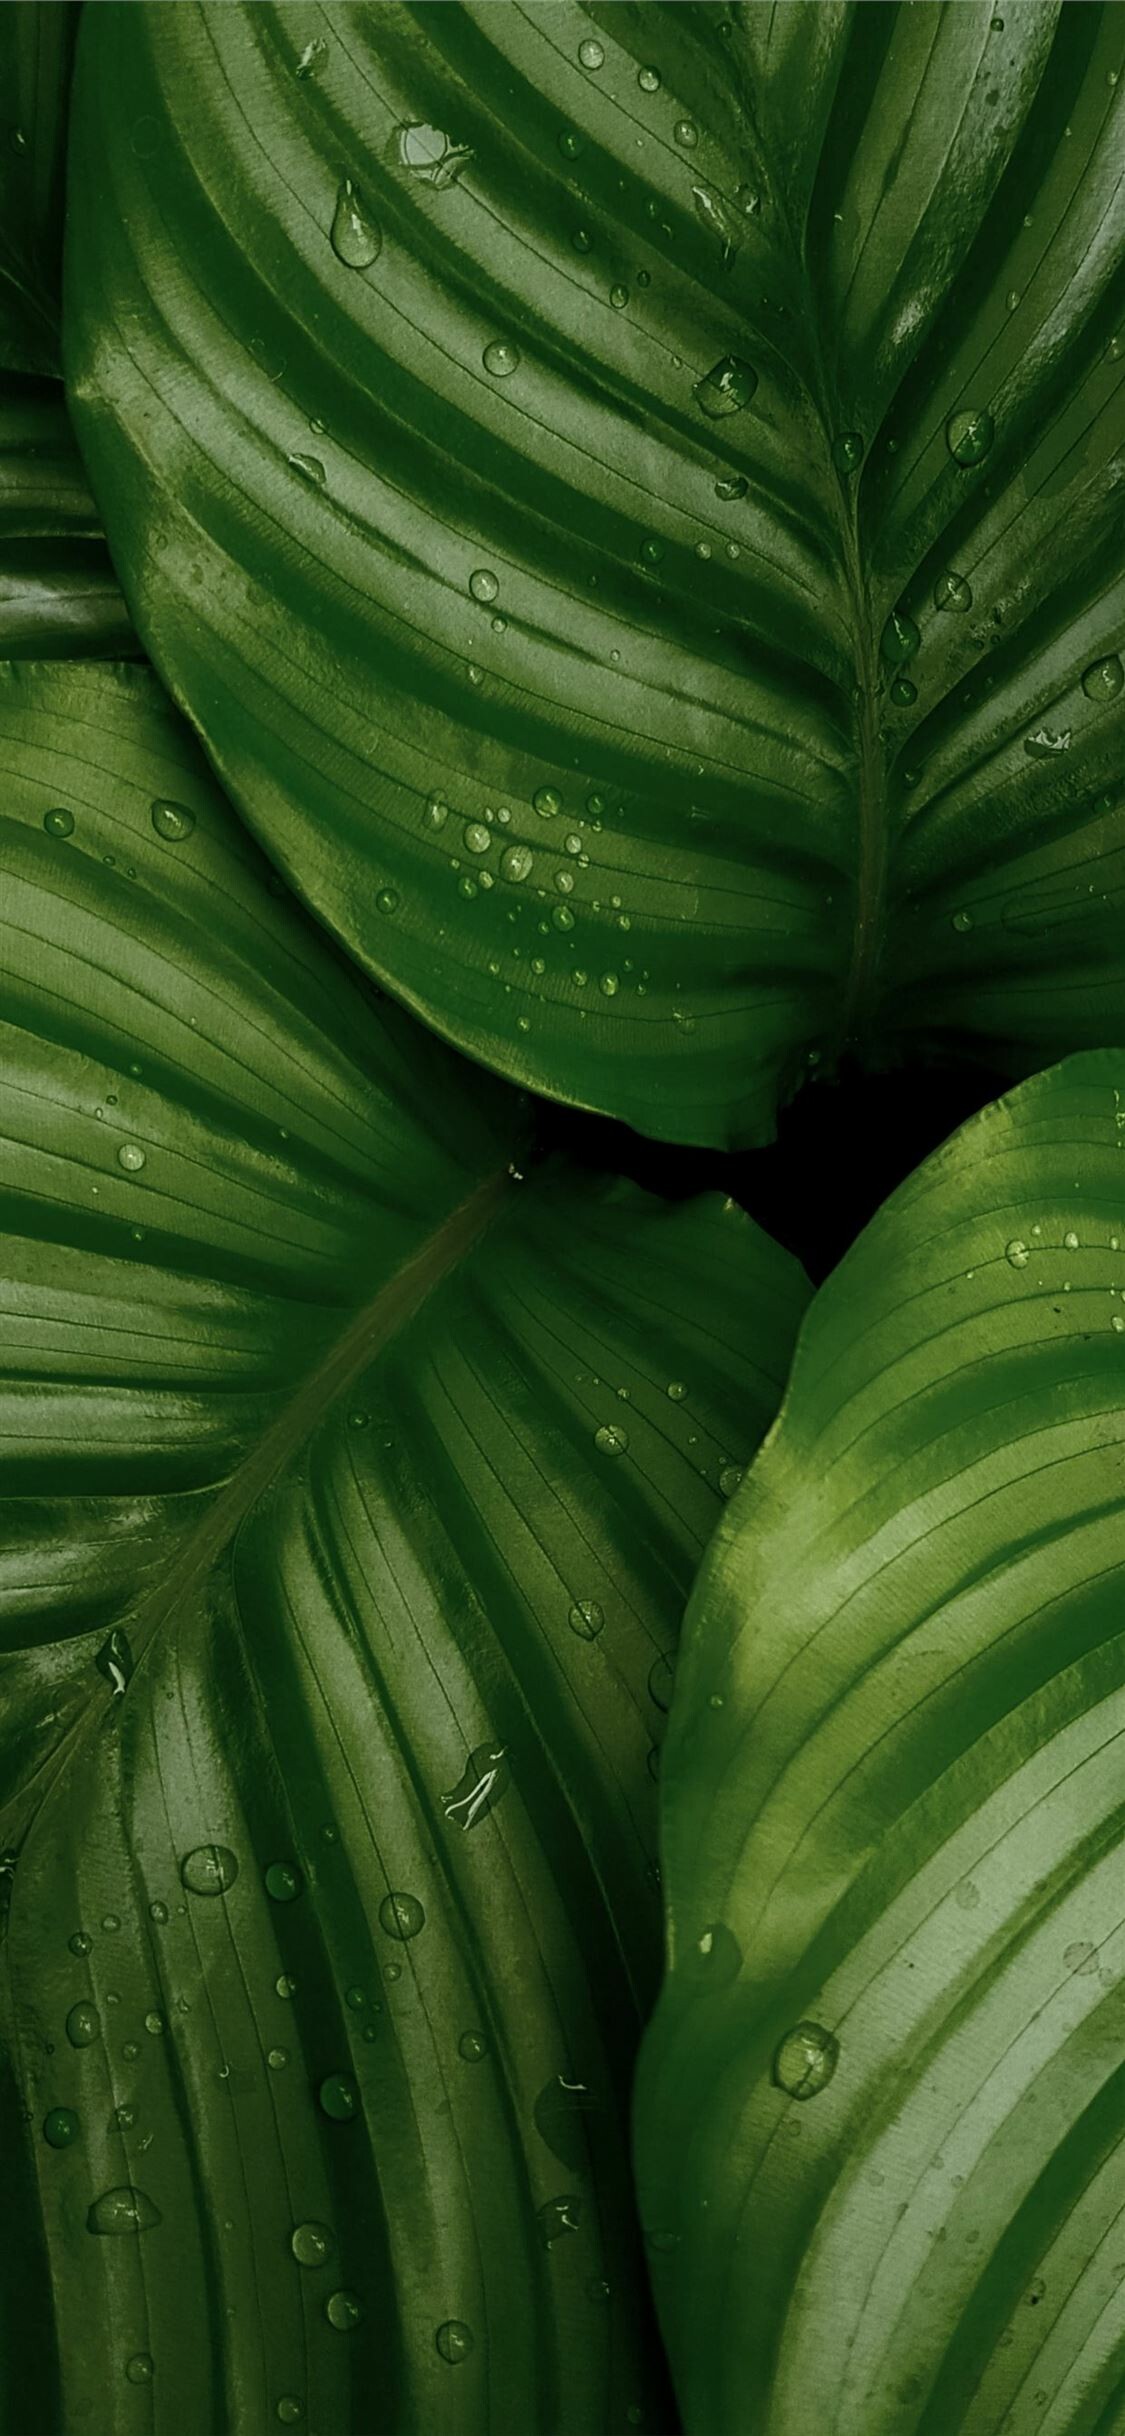 Leaf: Can change color as the seasons change, Greenery. 1130x2440 HD Wallpaper.